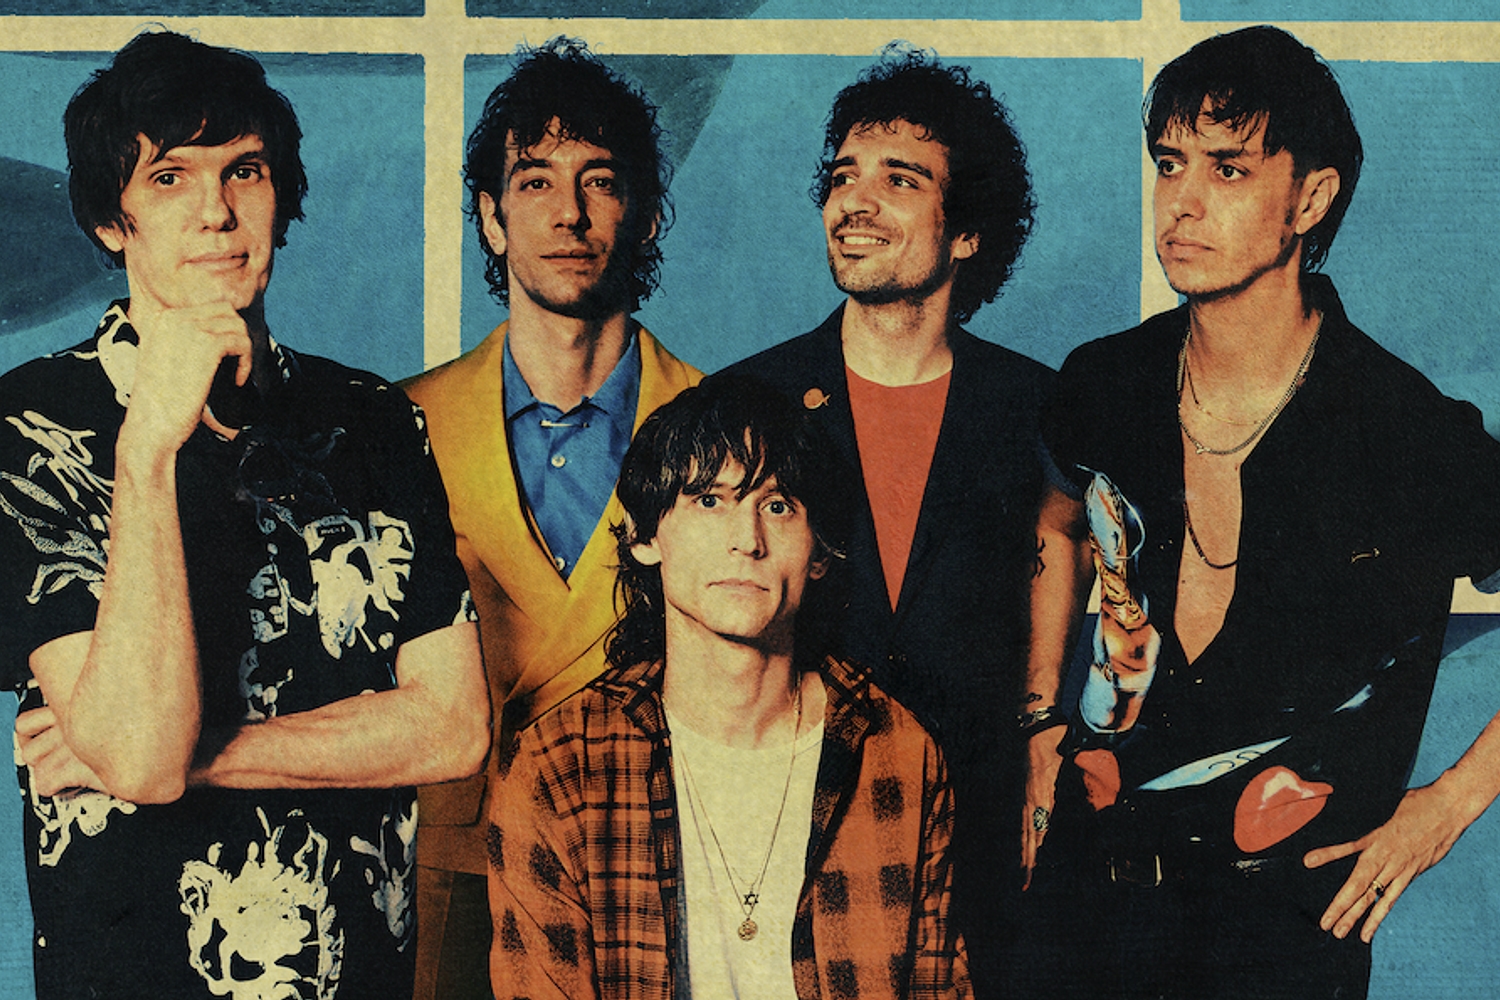 Tracks: The Strokes, Billie Eilish, Drug Store Romeos and more